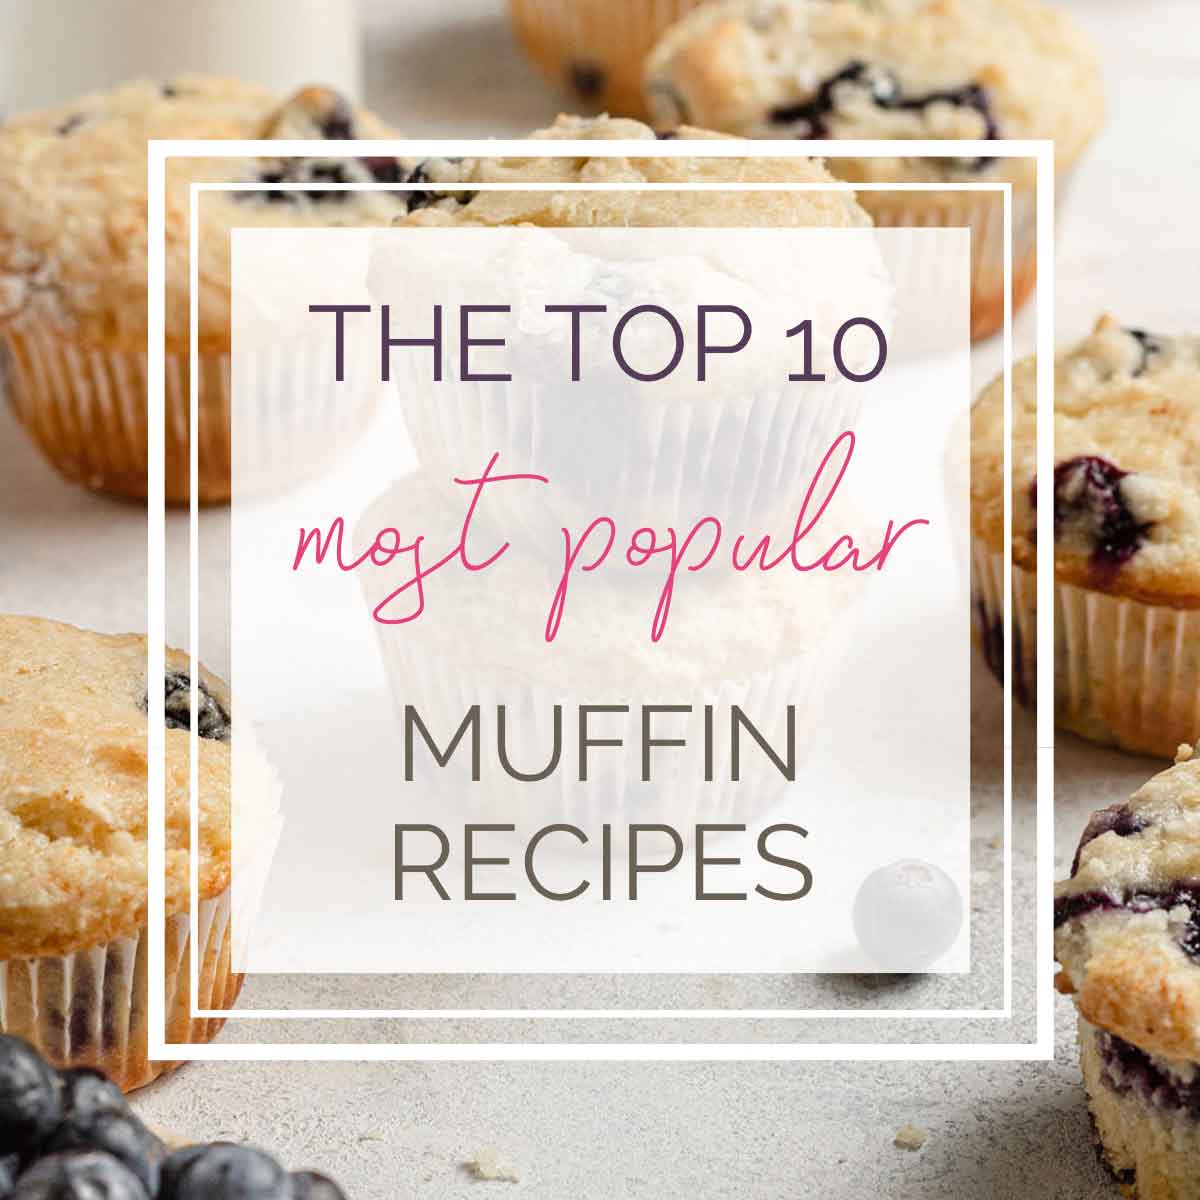 A photo of blueberry muffins with the text overlay "The Top 10 Most Popular Muffin Recipes".